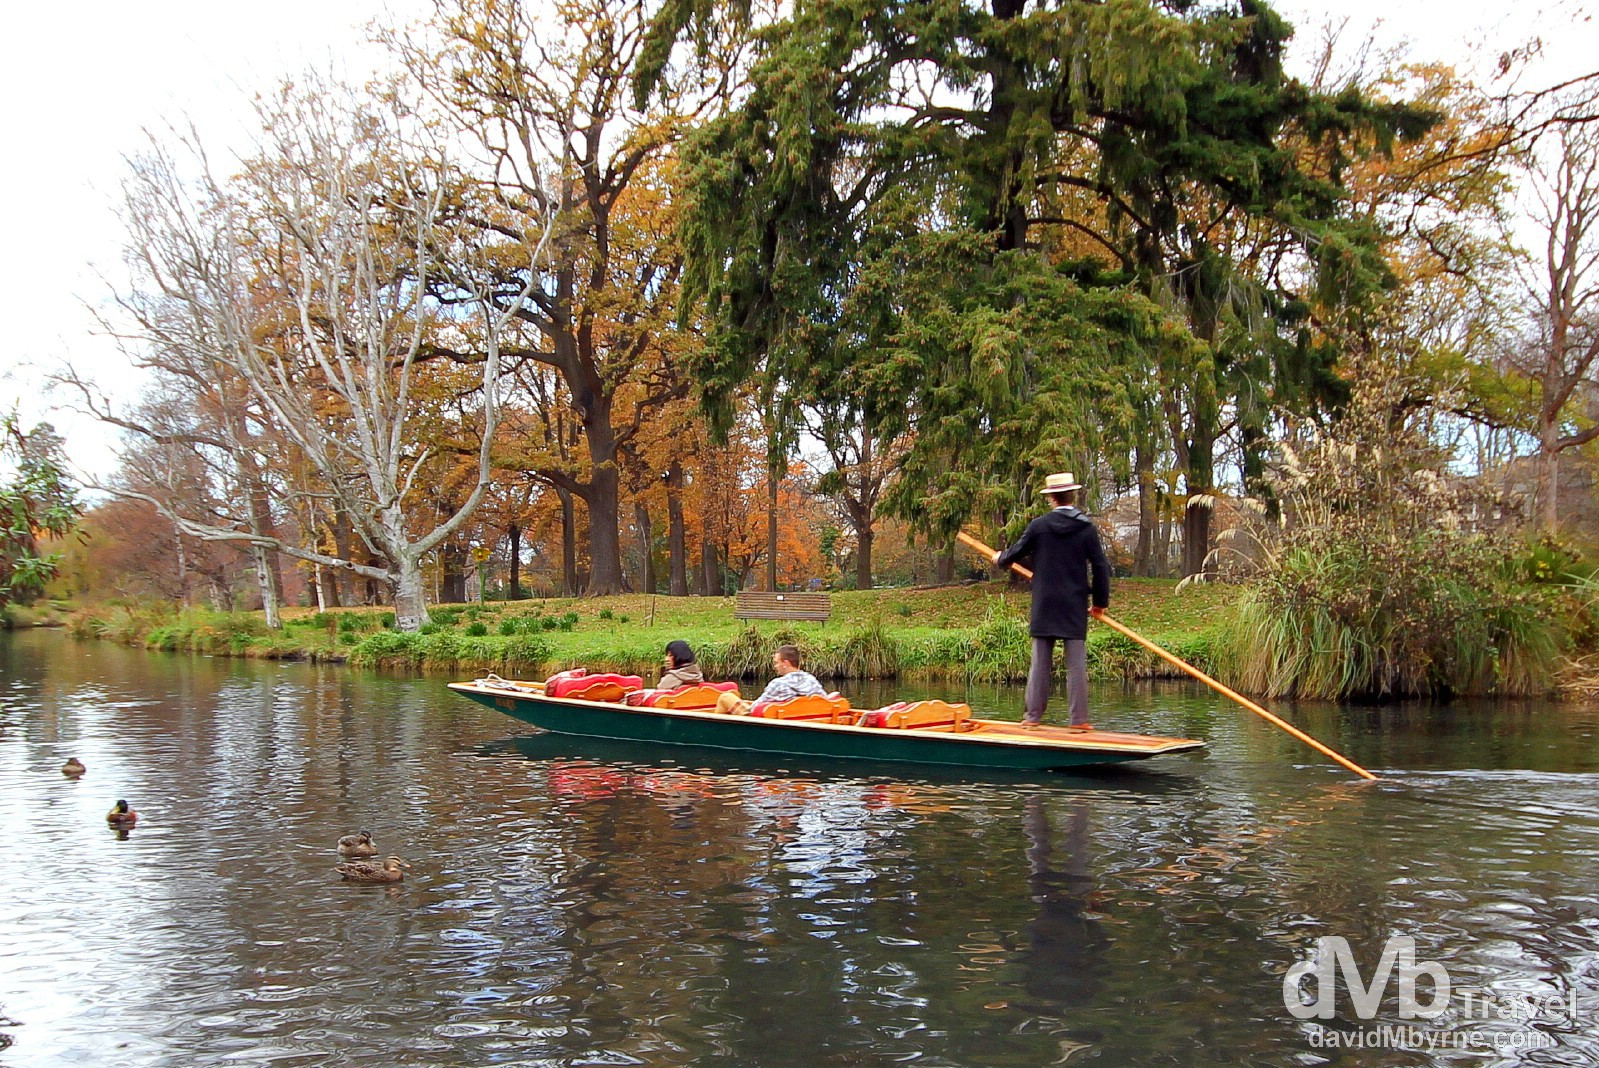 Punting on the Avon River in the Botanic Gardens, Christchurch, South Island, New Zealand. June 3rd 2012.